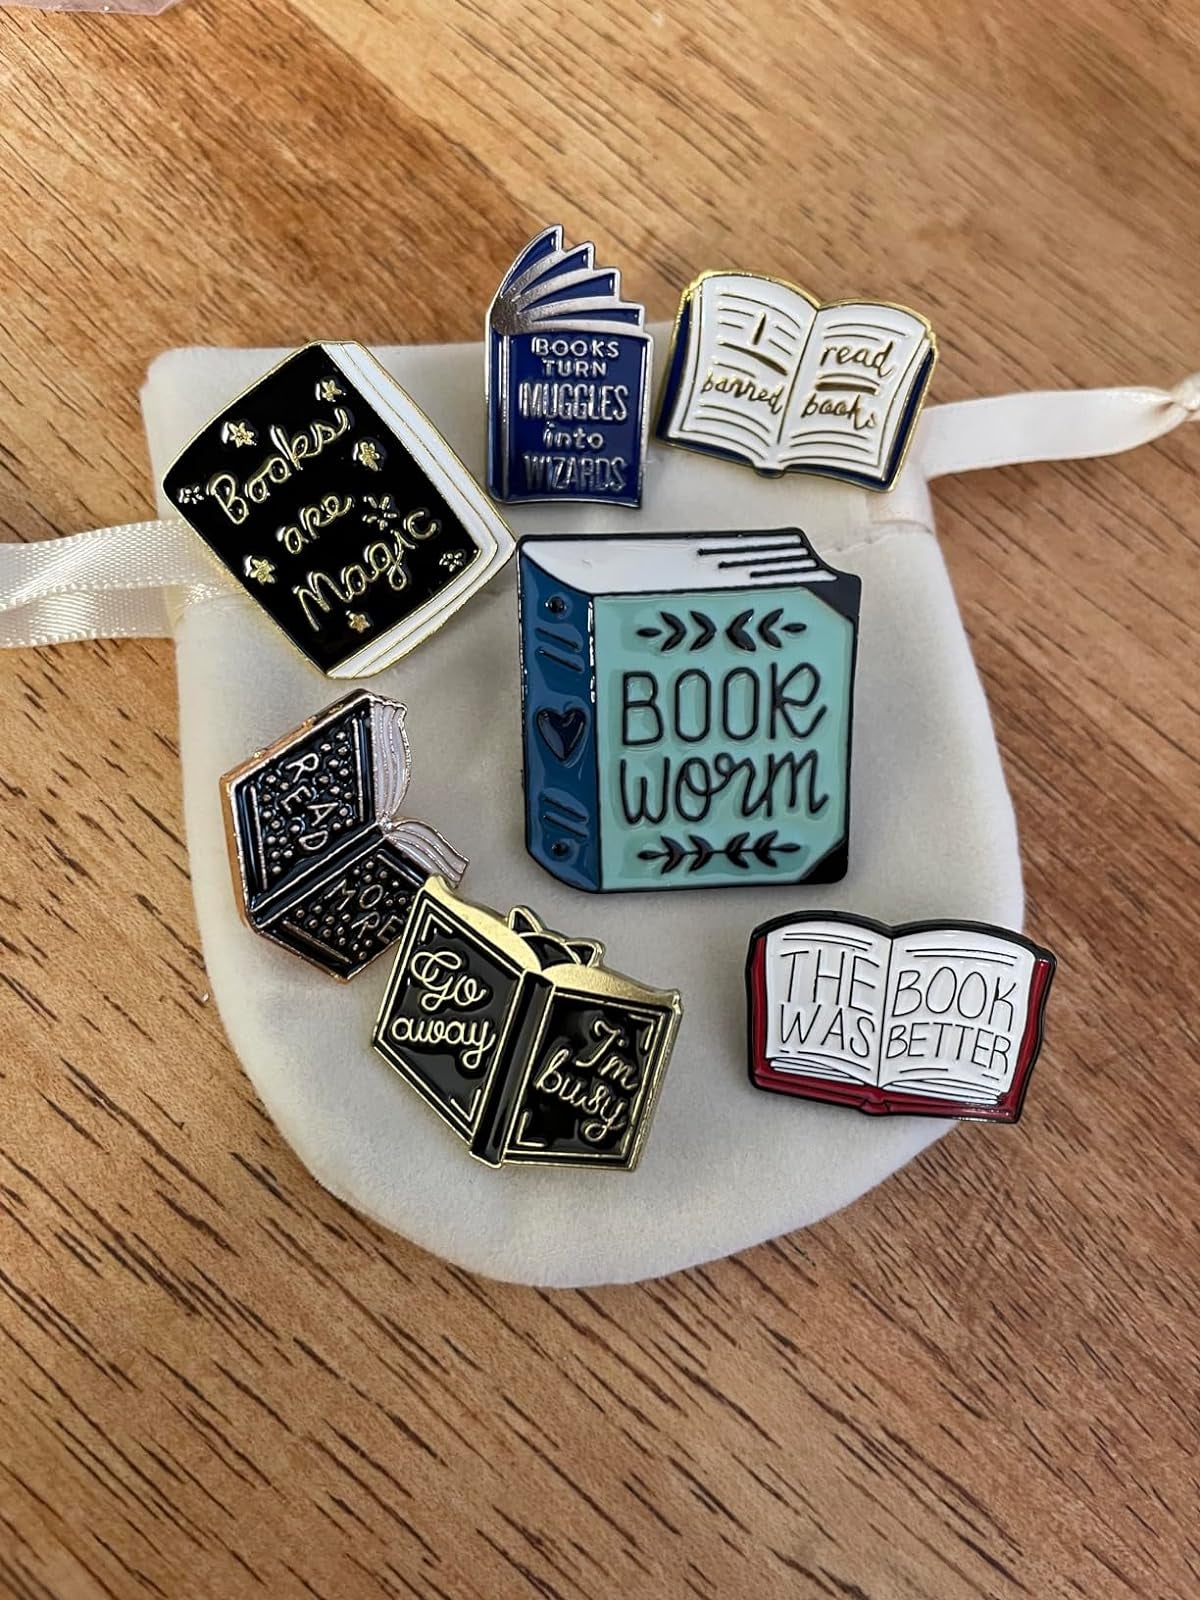 35 Gifts For Book Lovers That Aren't Books